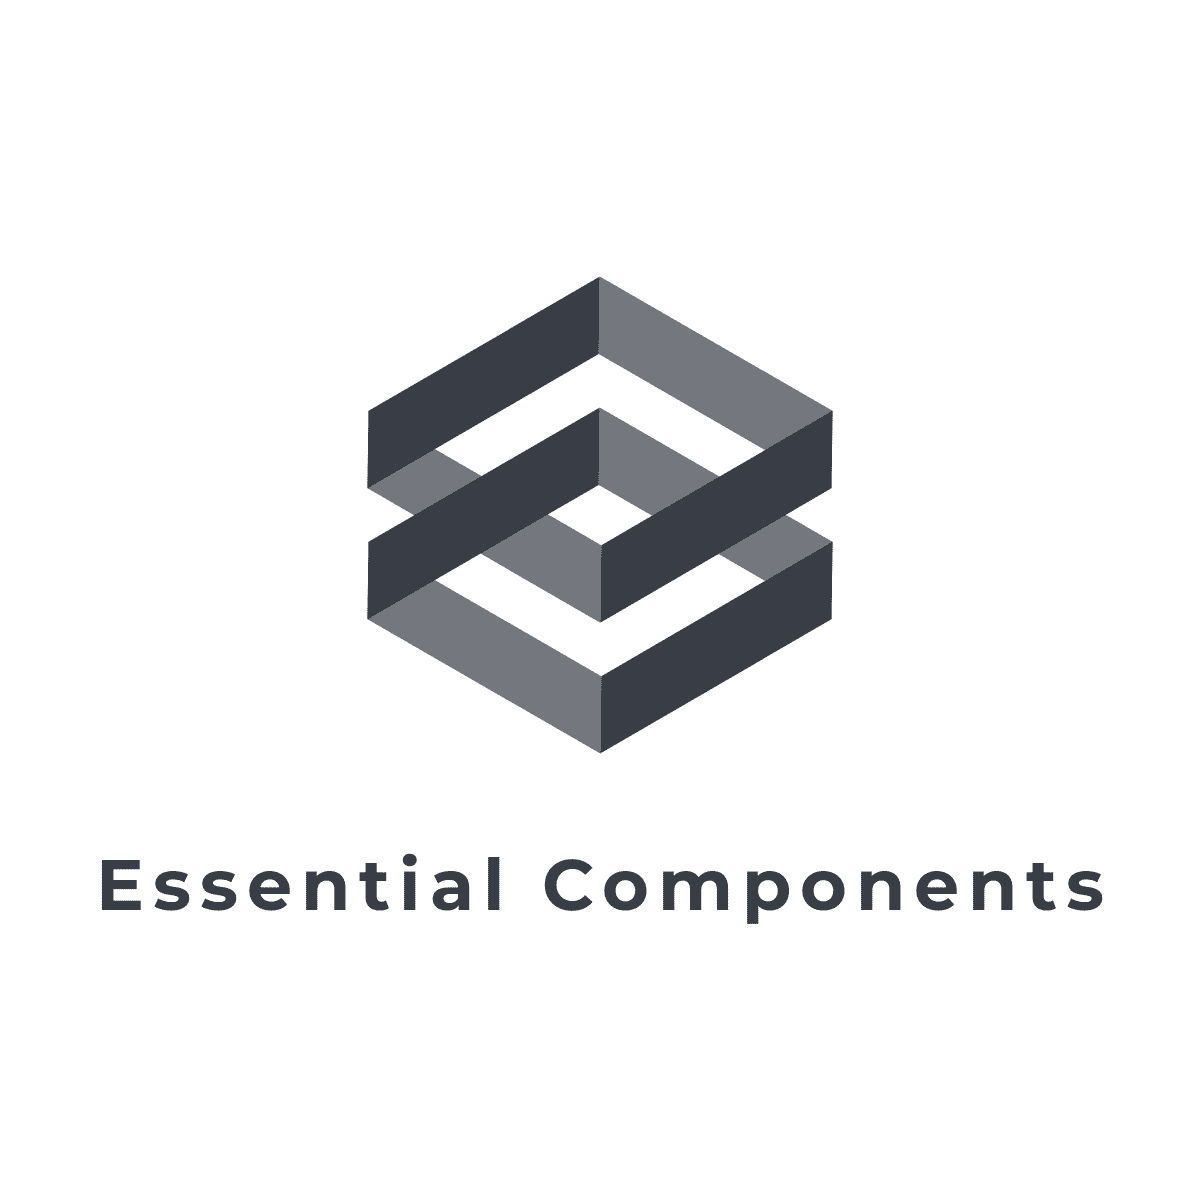 Essential Components